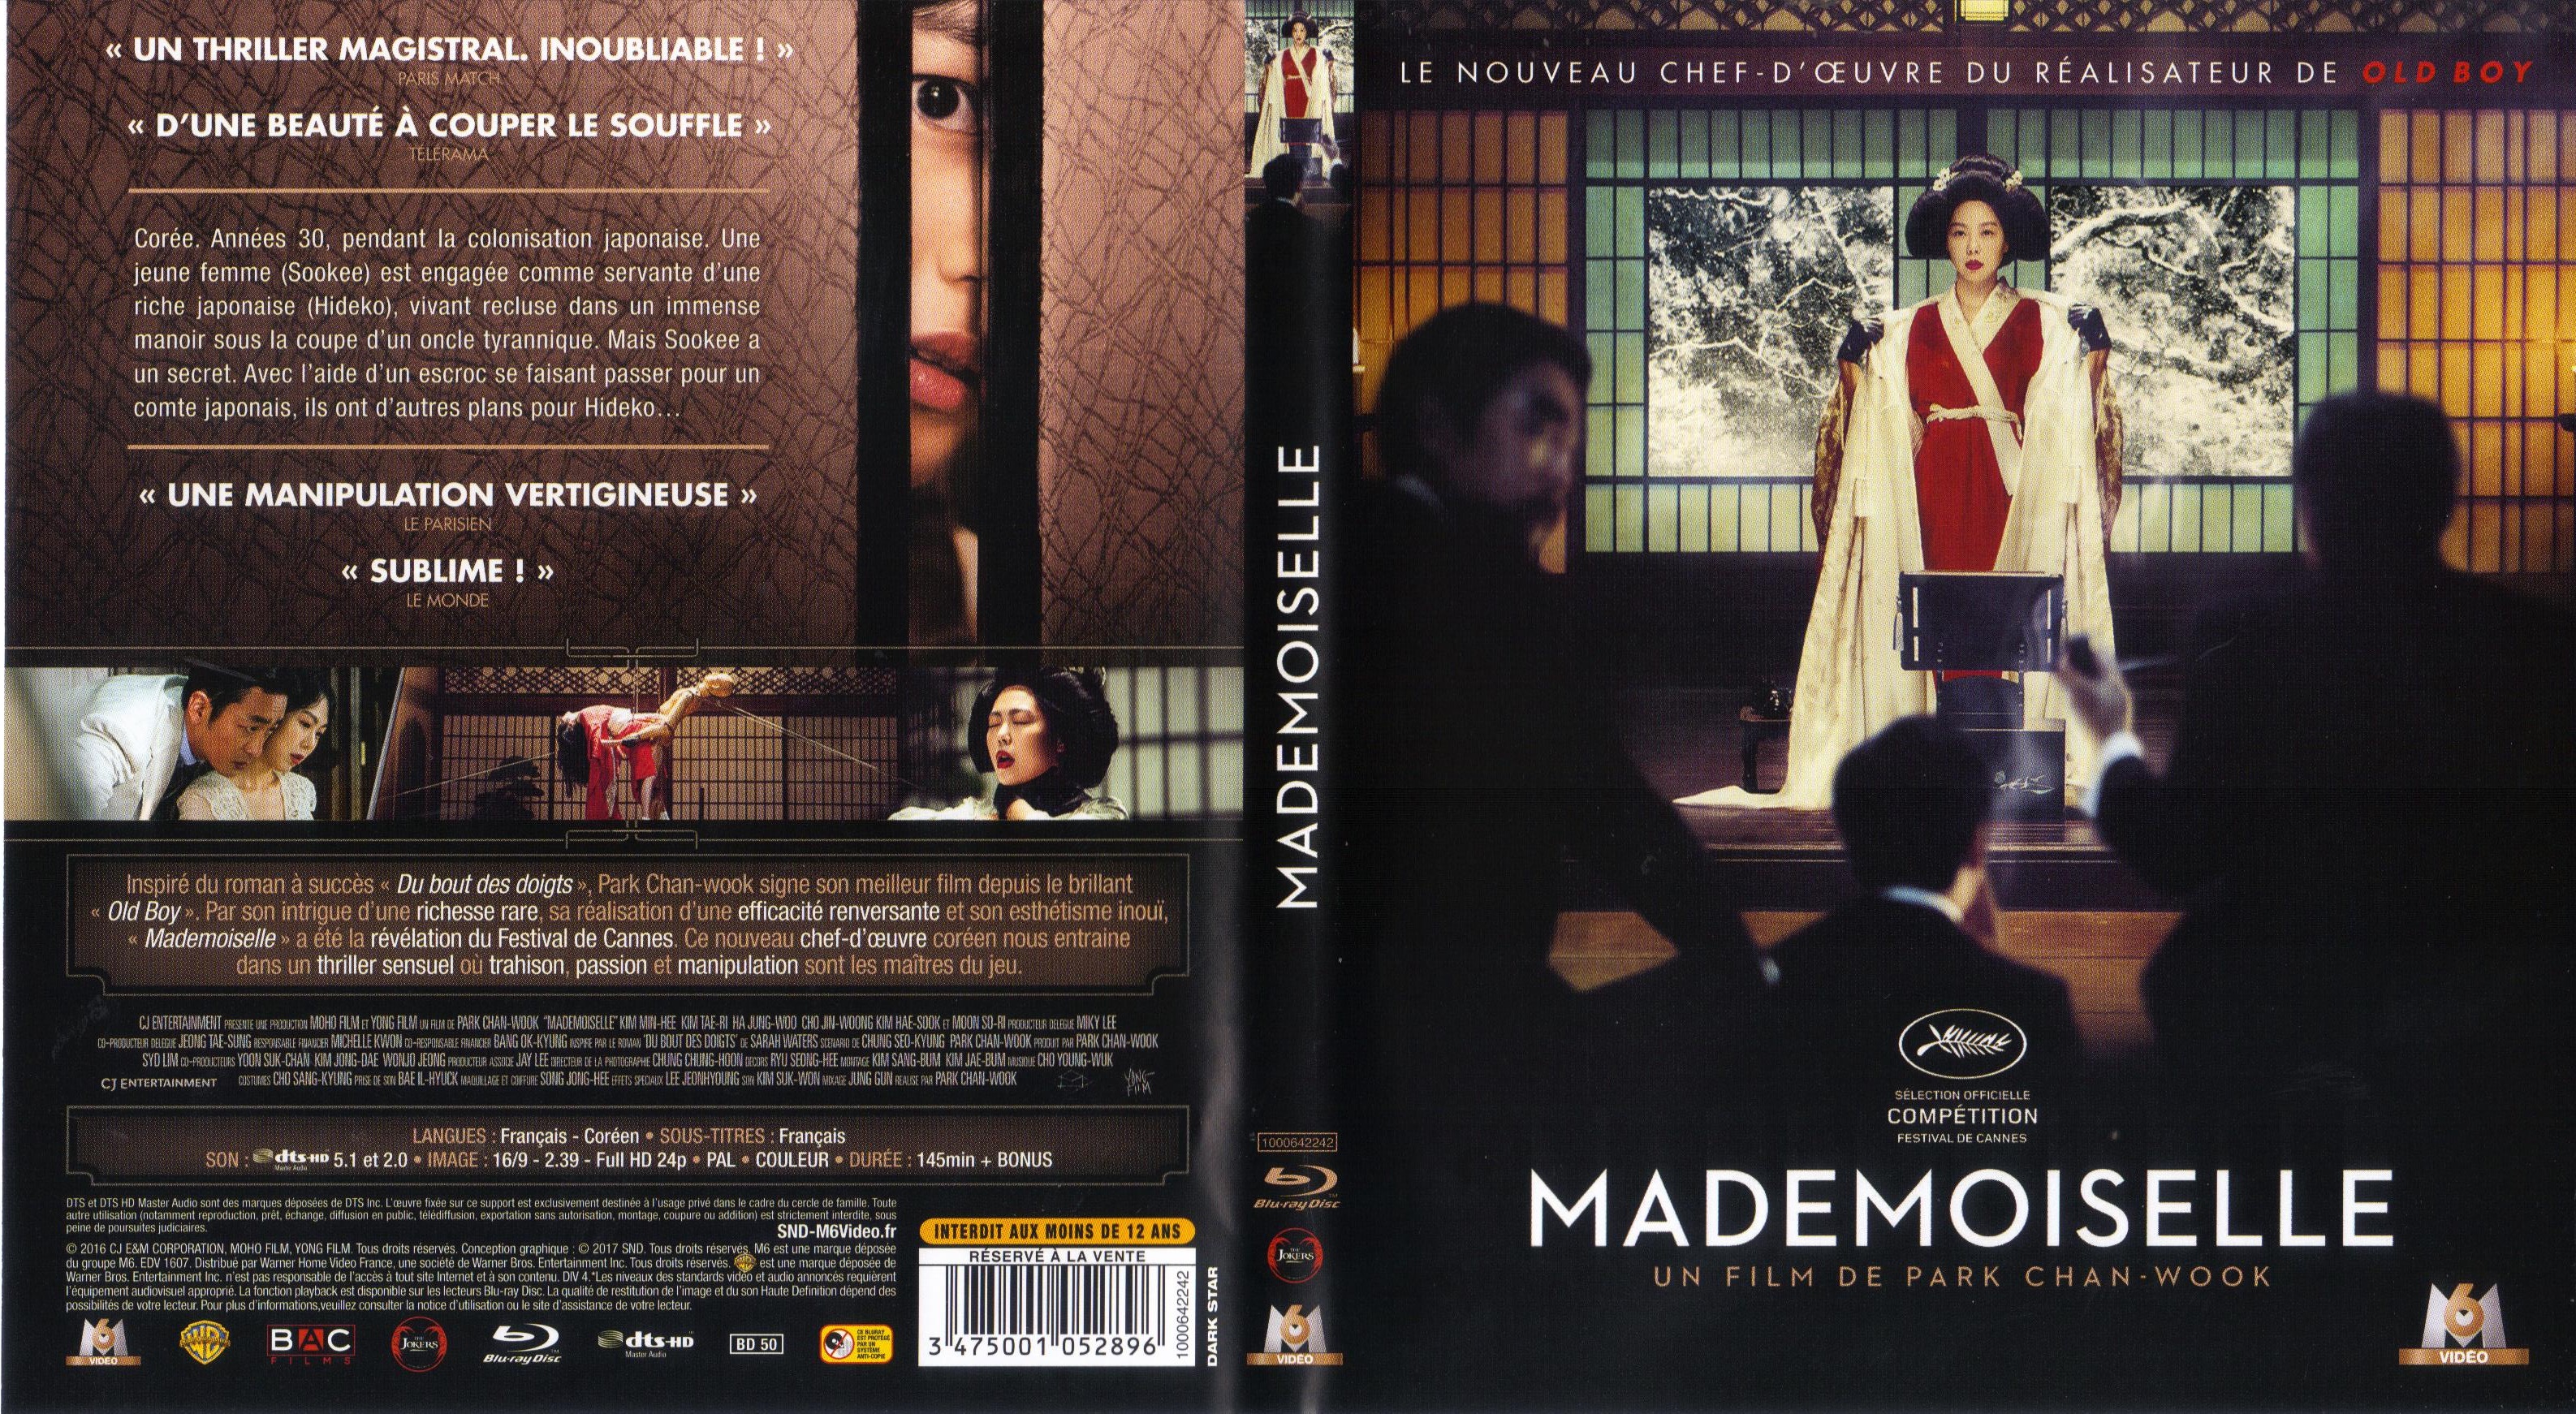 Jaquette DVD Mademoiselle (BLU-RAY)